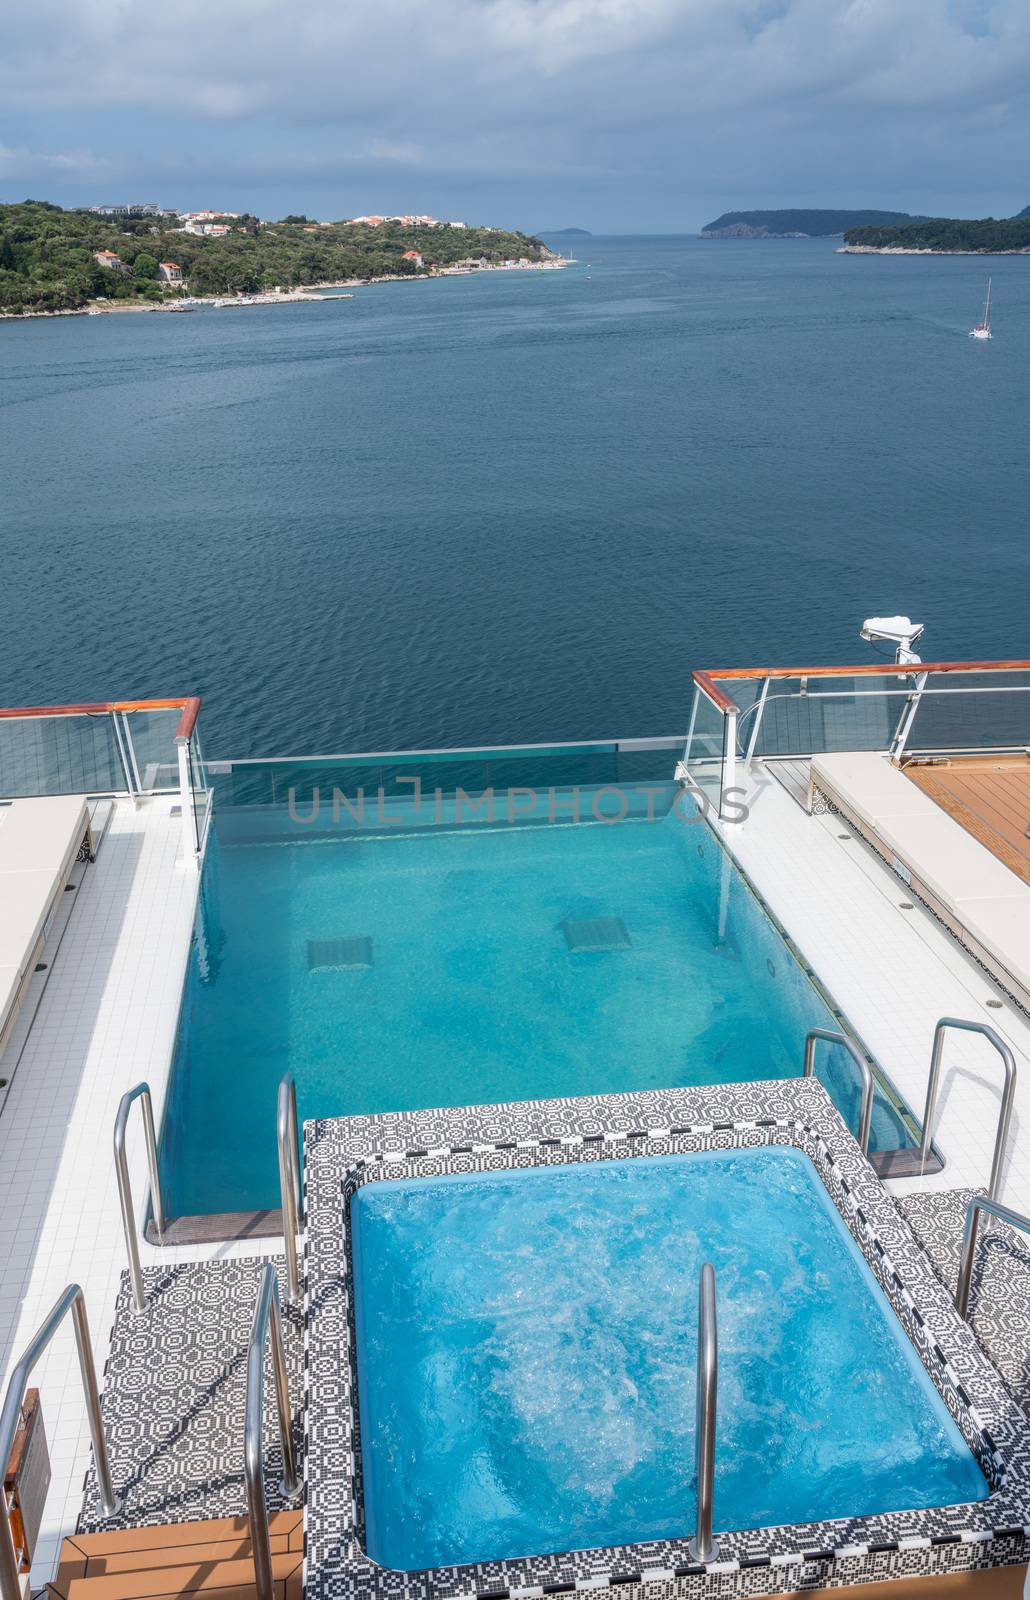 Infinity swimming pool on ship in the port of Dubrovnik in Croatia by steheap